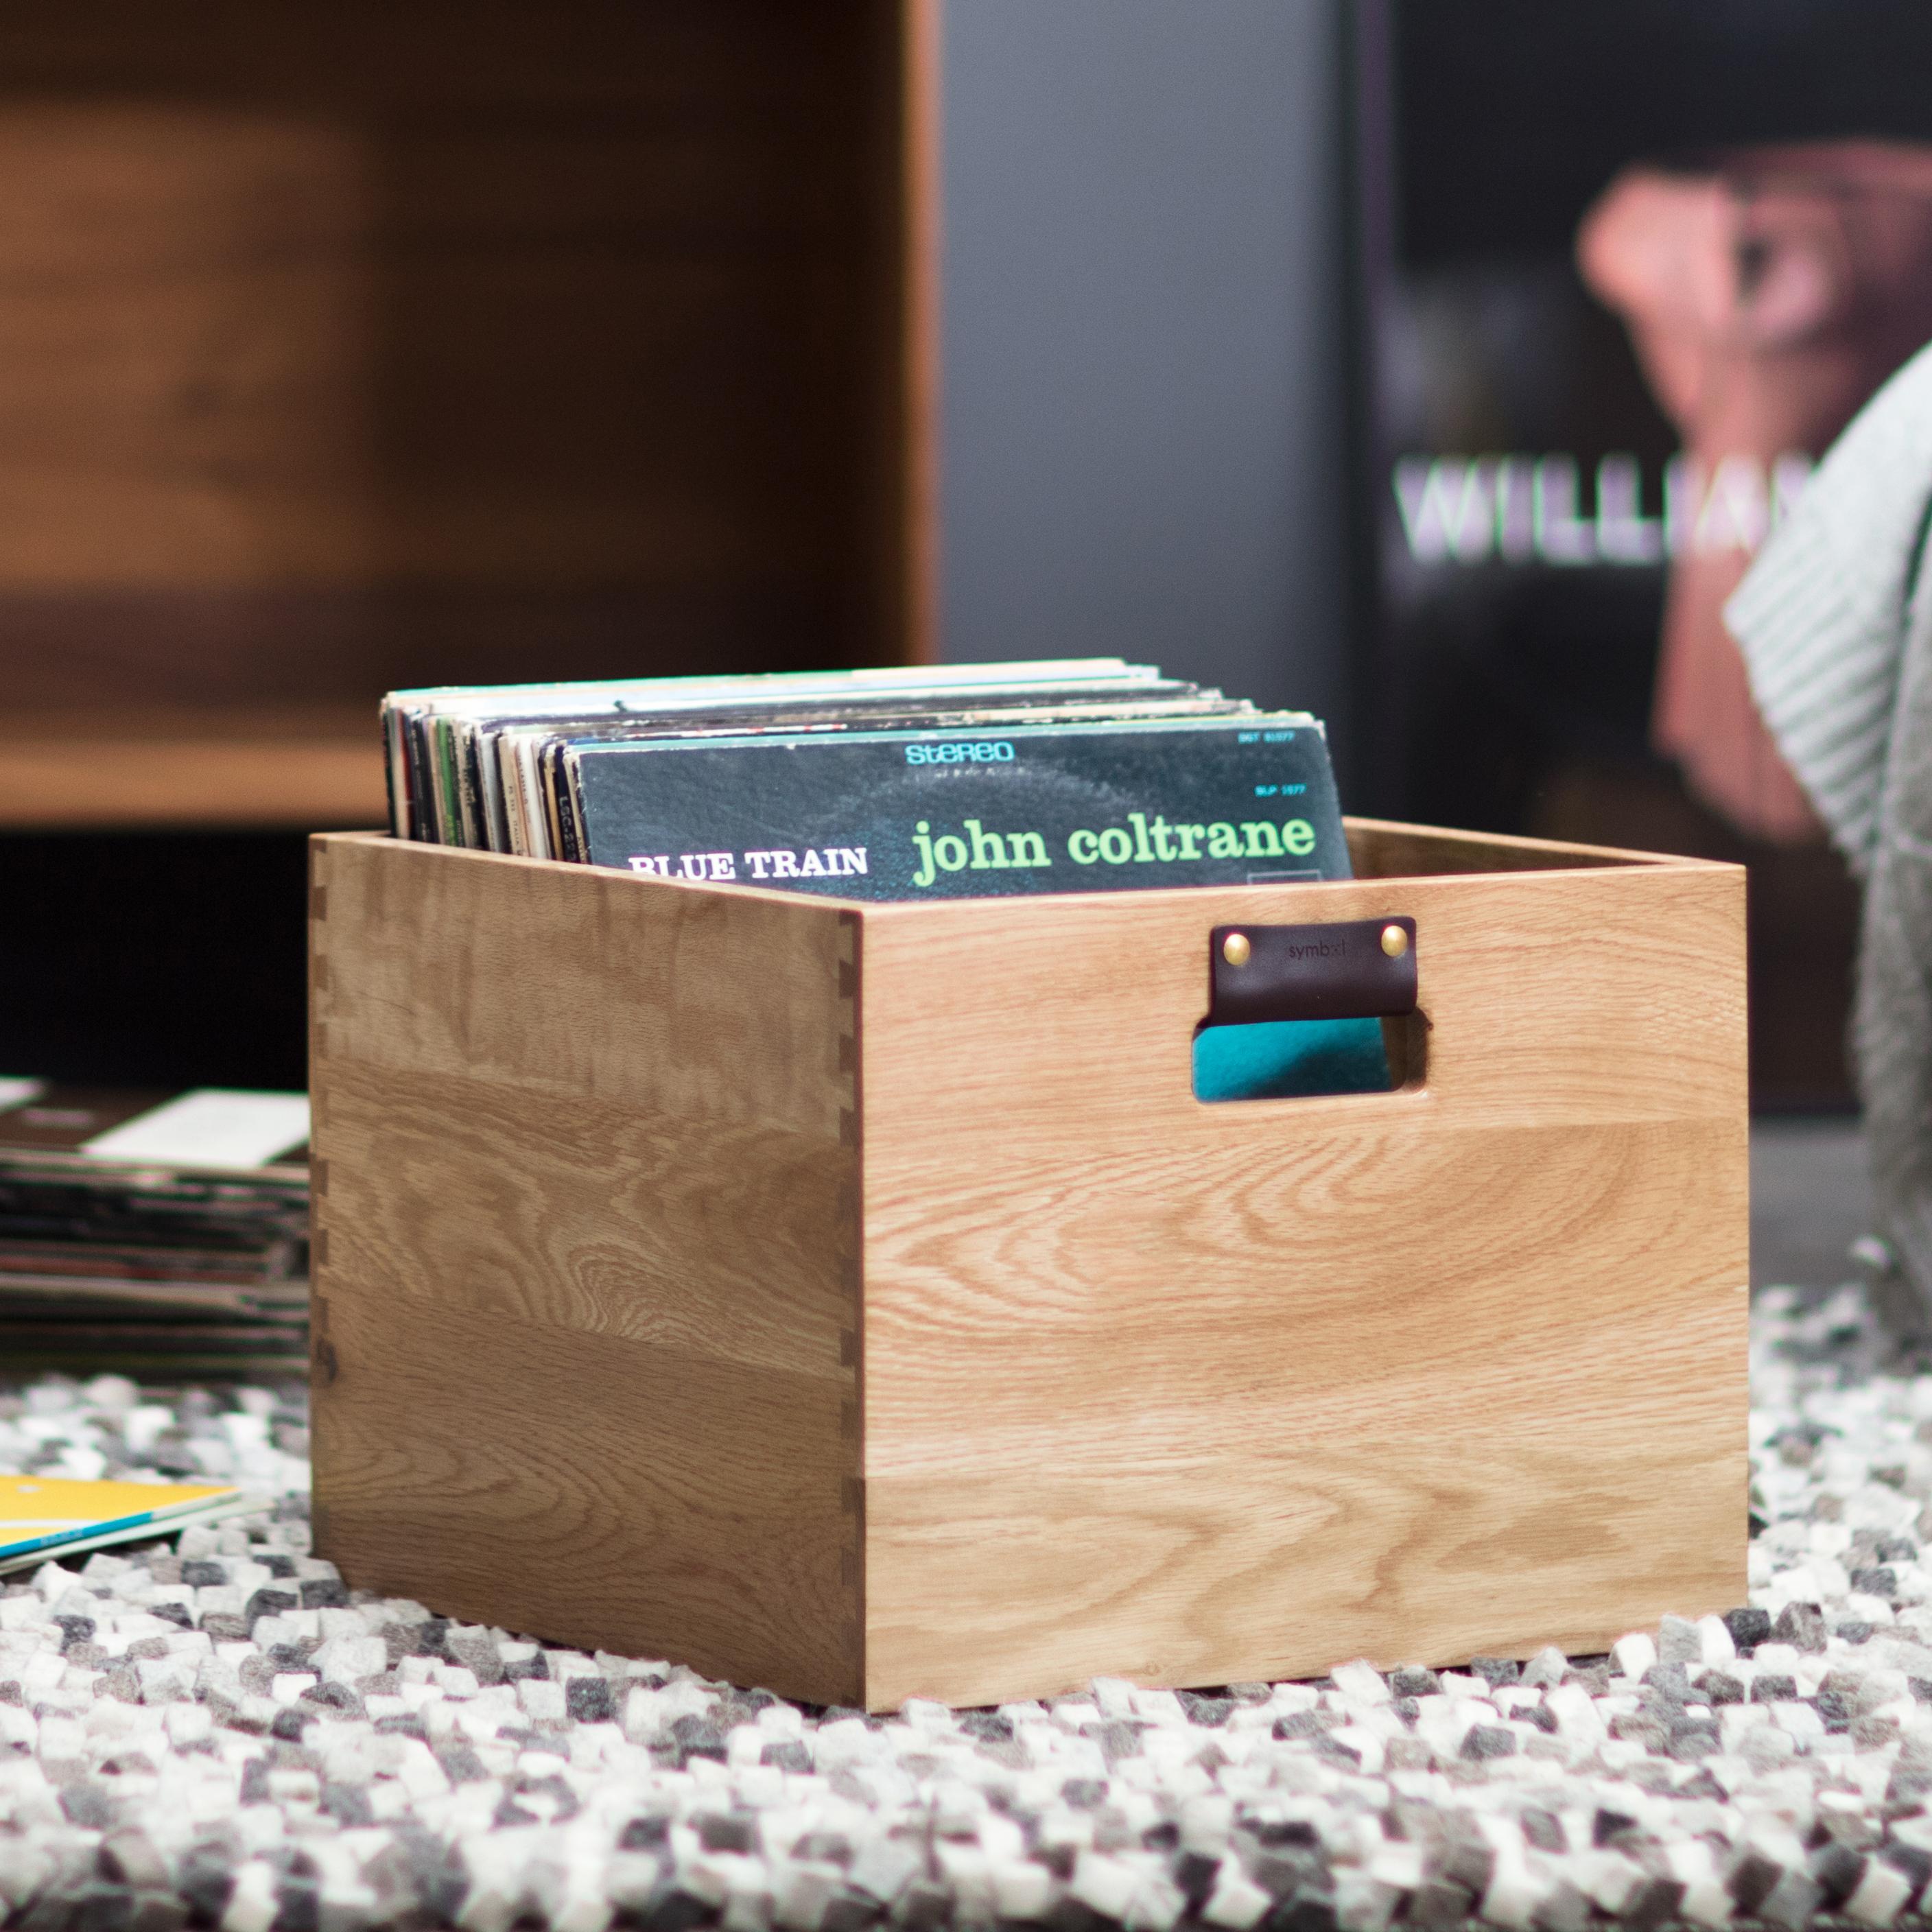 As avid record collectors we all have albums we want close at hand. Whether storing new finds or favourite titles that are in heavy rotation, our dovetail record crate is the perfect way to store up to 100 LPs in a portable, beautifully crafted